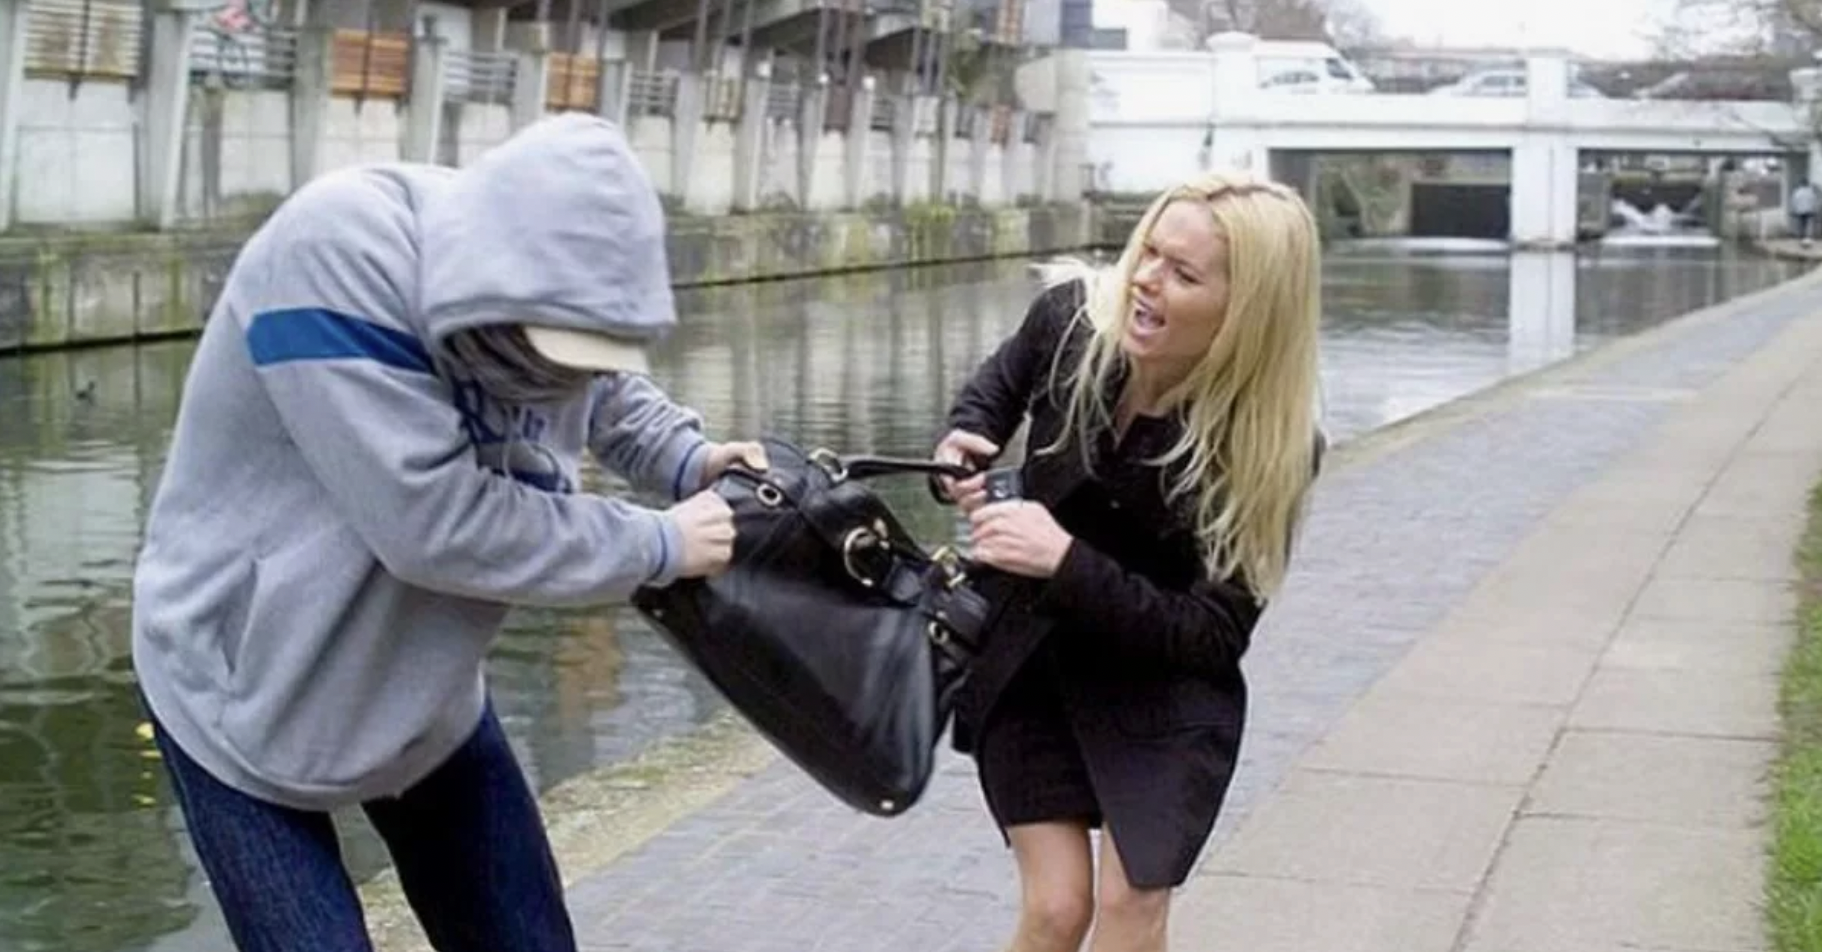 Man is trying to steal woman's bag | Source: Shutterstock